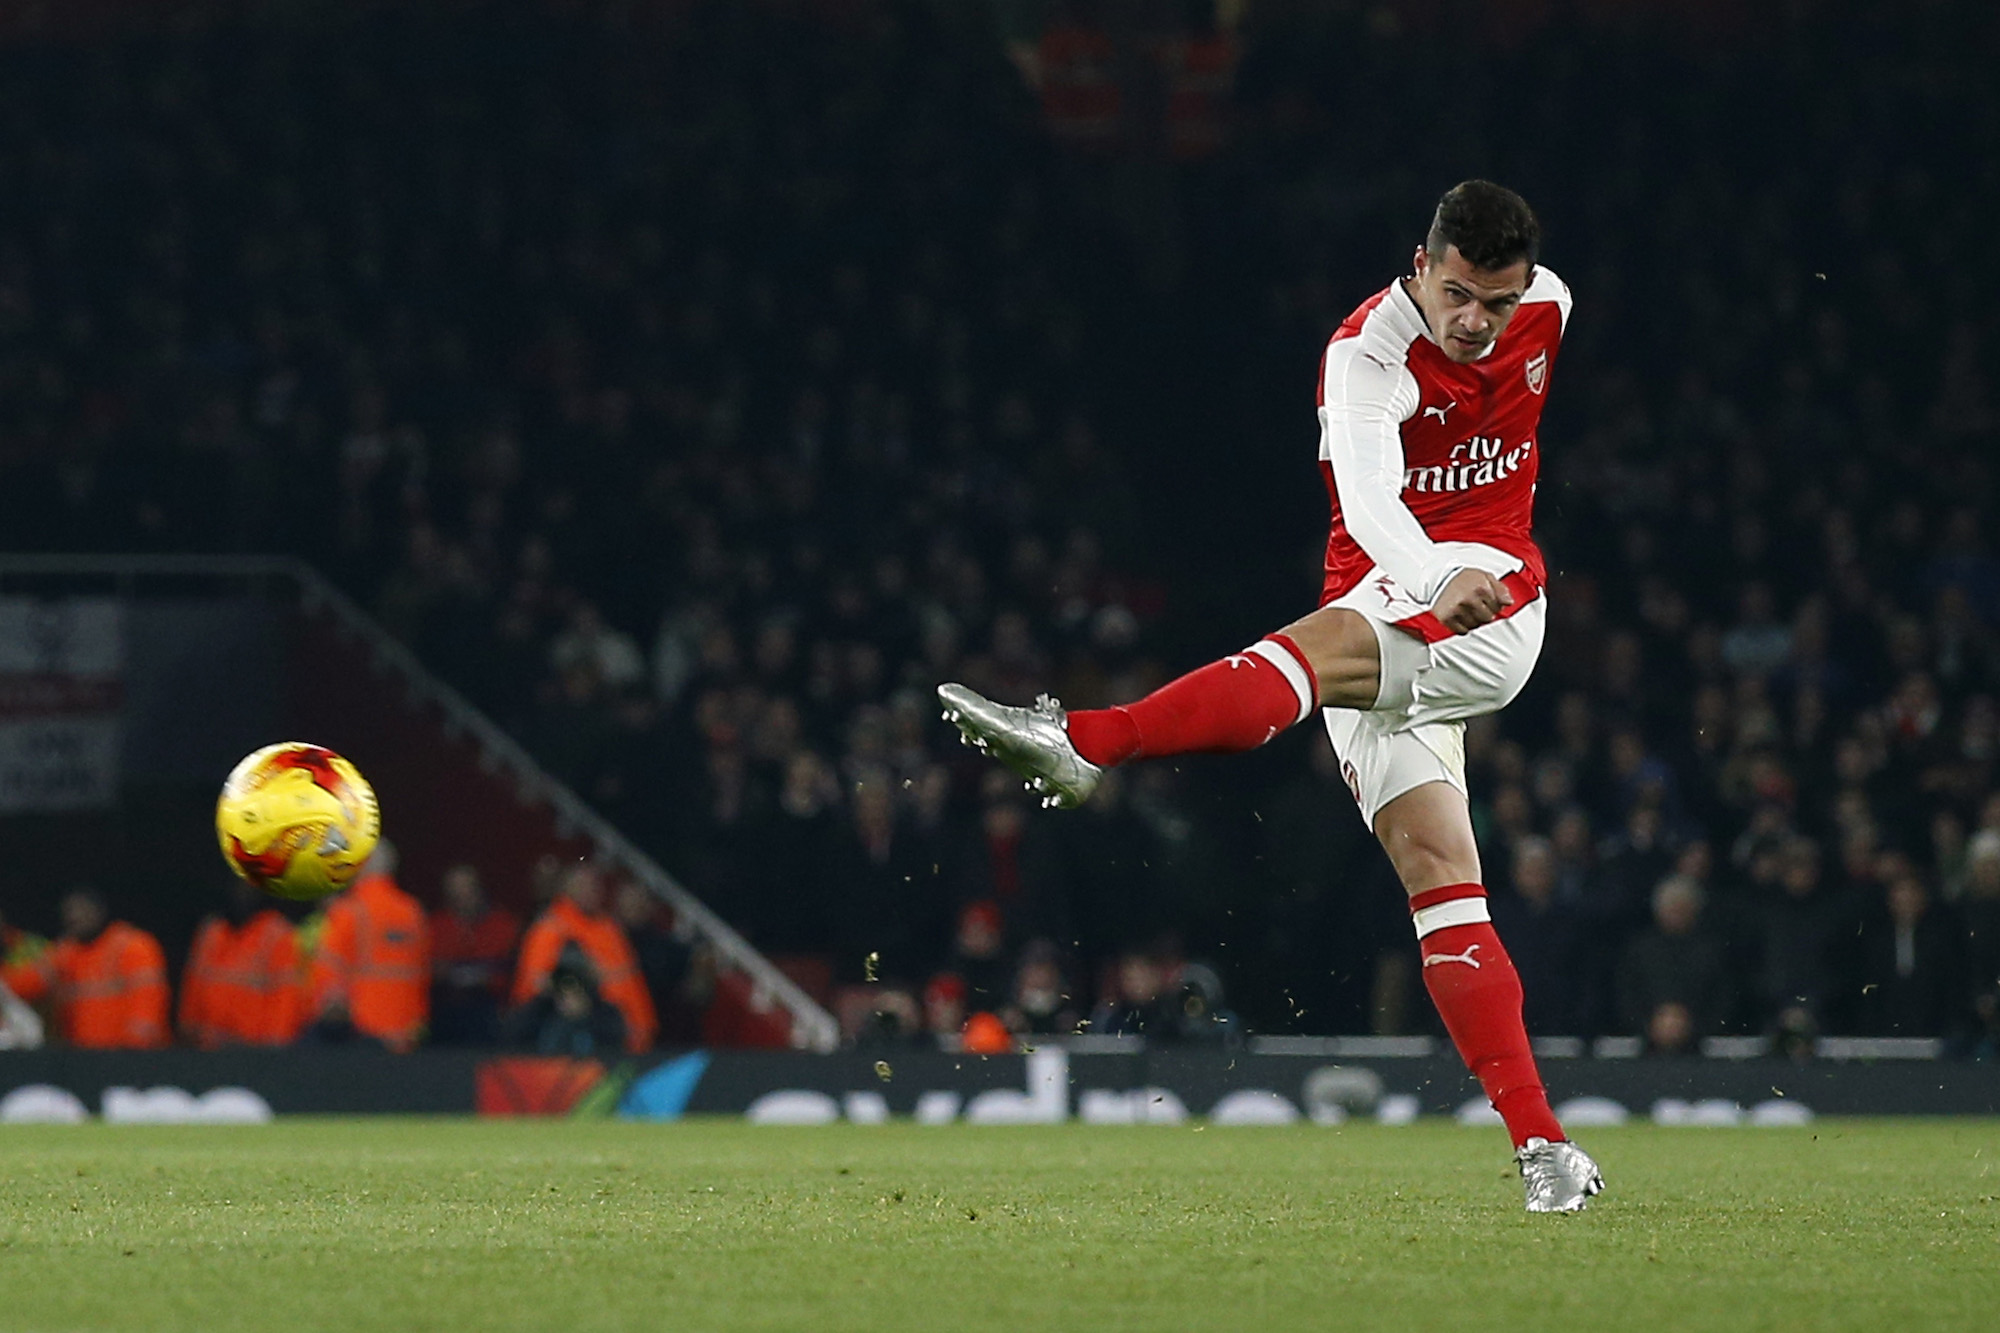 Britain Football Soccer - Arsenal v Southampton - EFL Cup Quarter Final - Emirates Stadium - 30/11/16 Arsenal's Granit Xhaka shoots at goal Action Images via Reuters / Andrew Couldridge Livepic EDITORIAL USE ONLY. No use with unauthorized audio, video, data, fixture lists, club/league logos or 